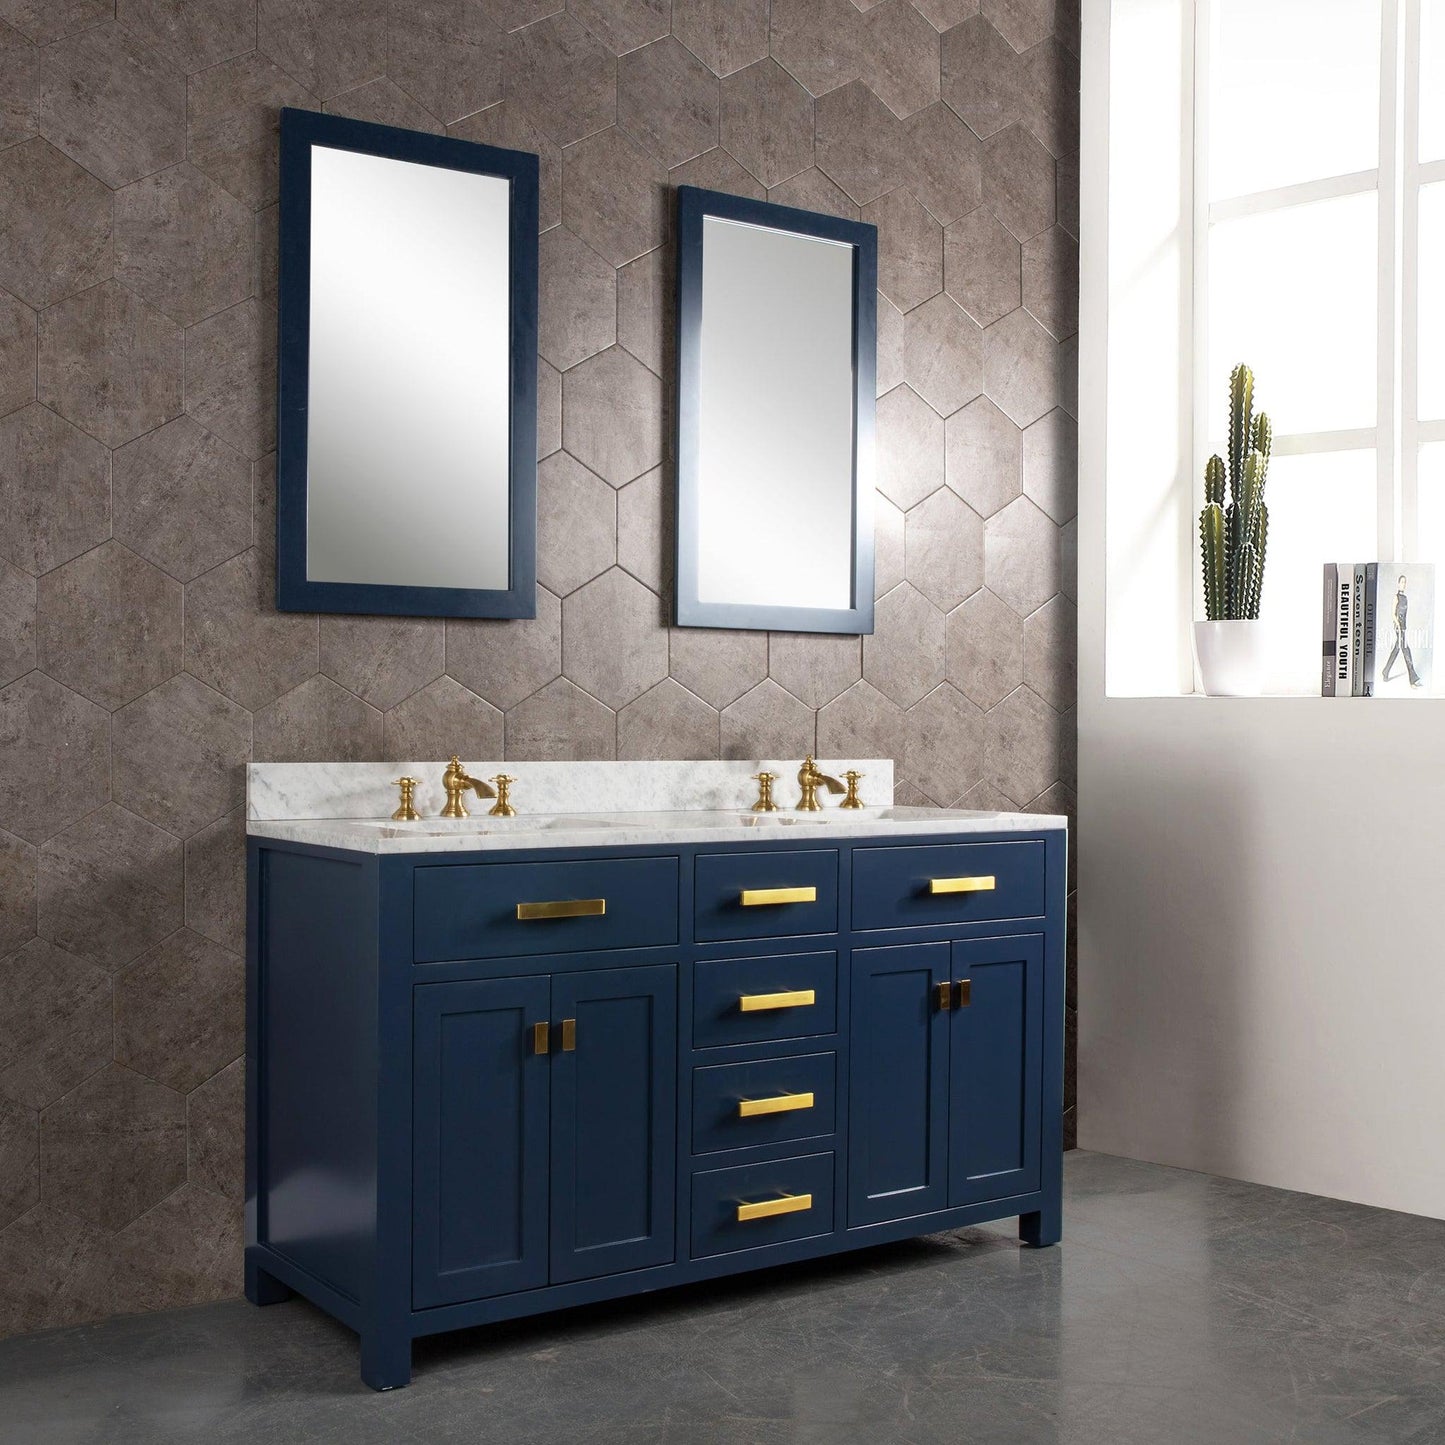 Water Creation Madison 60" Double Sink Carrara White Marble Vanity In Monarch BlueWith Matching Mirror(s) and F2-0013-06-FX Lavatory Faucet(s)